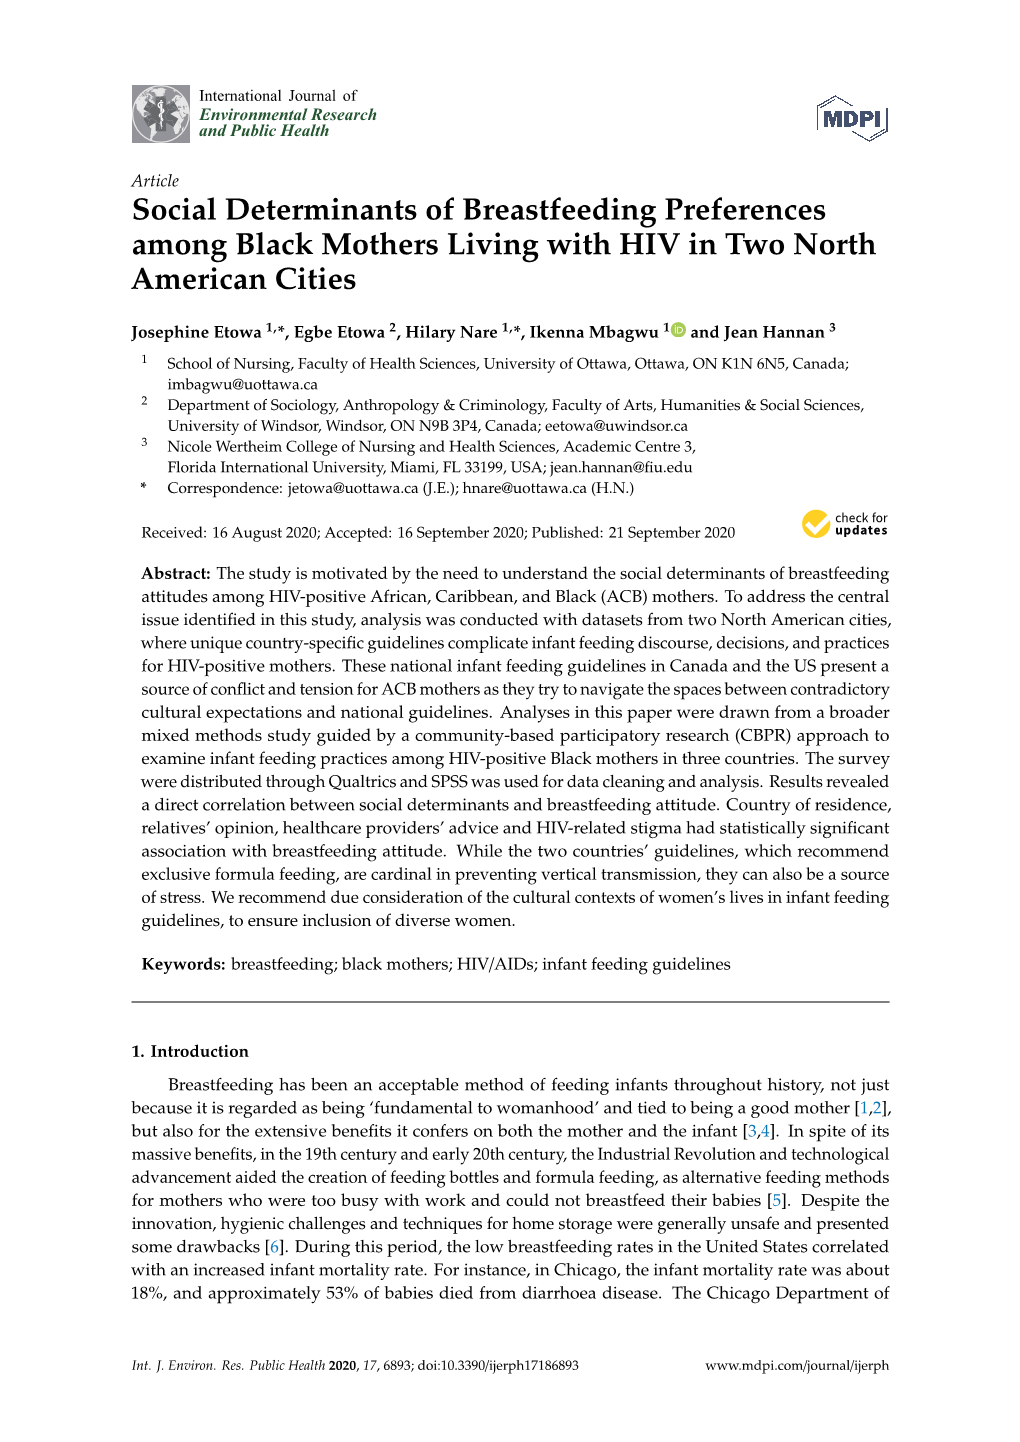 Social Determinants of Breastfeeding Preferences Among Black Mothers Living with HIV in Two North American Cities